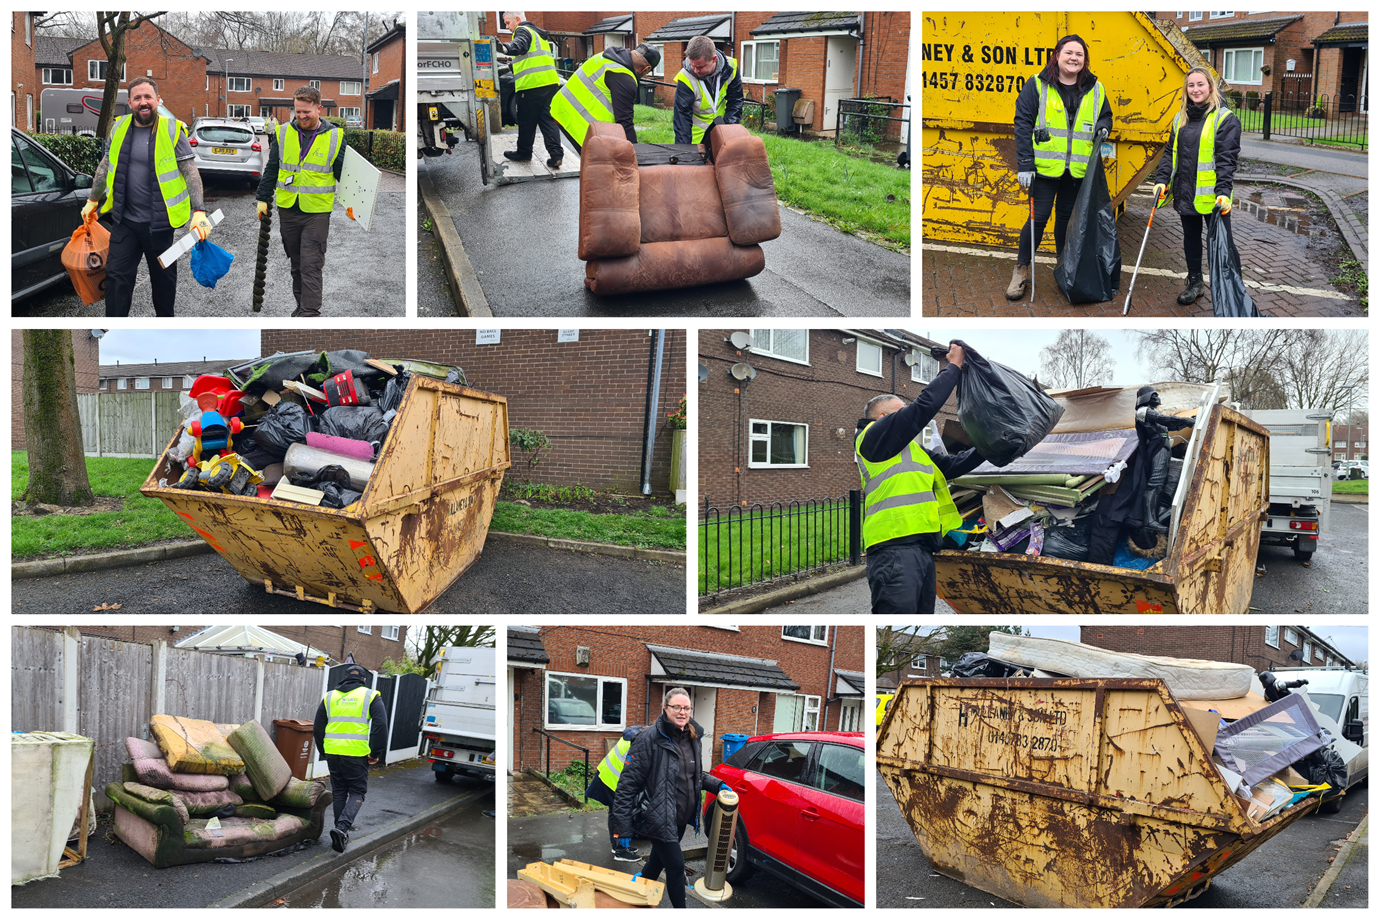 South Chadderton Community waste collection day